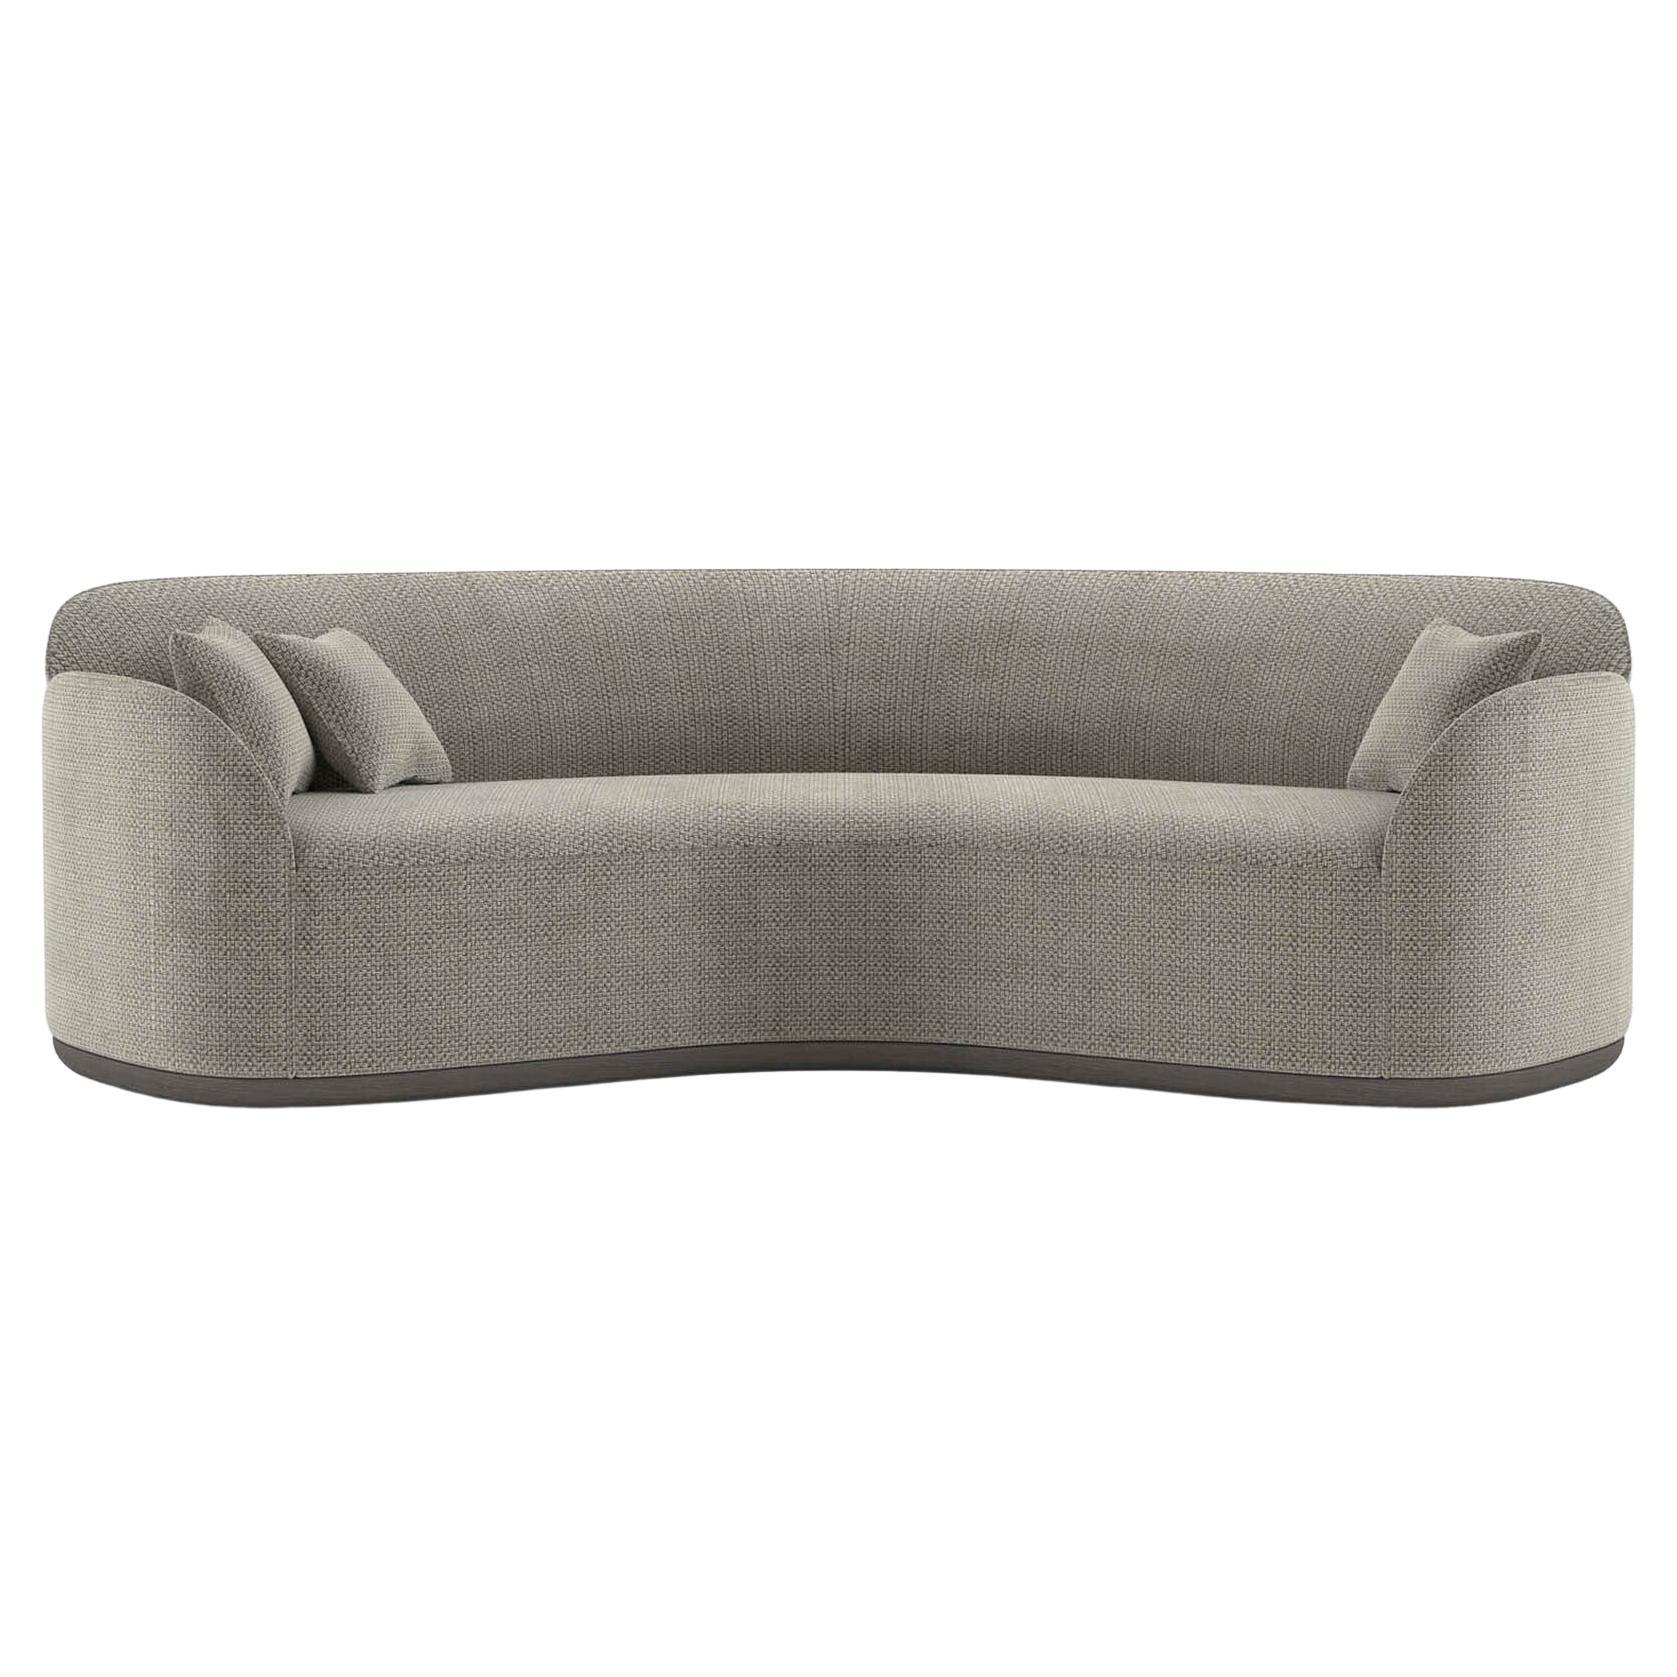 Contemporary Curved Sofa 'Unio' by Poiat, Hanoi 04 by Pierre Frey